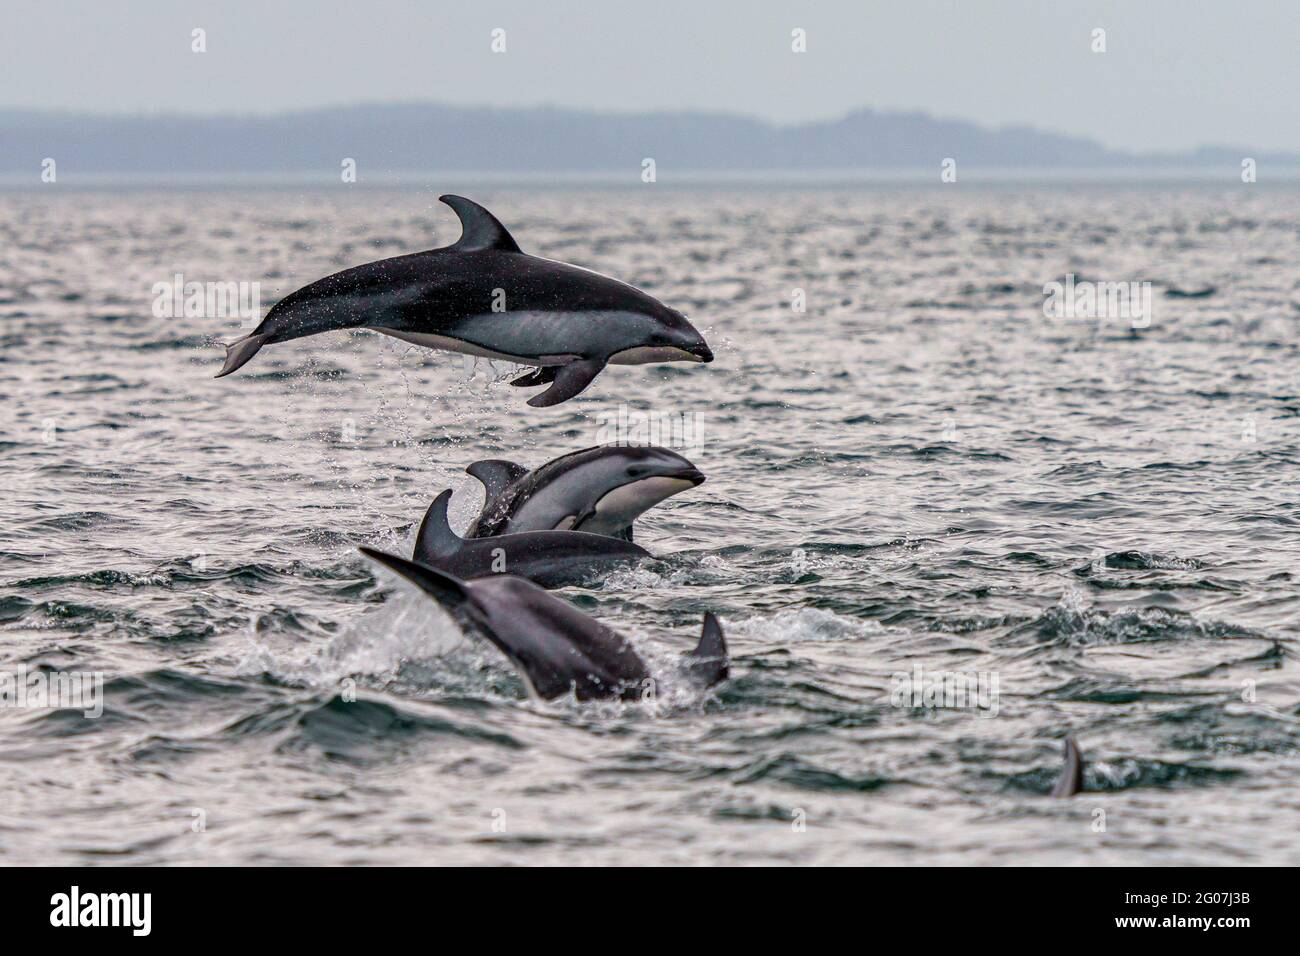 Pacific white-sided dolphins (Lagenorhynchus obliquidens) jumping and socializing in Johnstone Strait, First Nations Territory, British Columbia, Cana Stock Photo